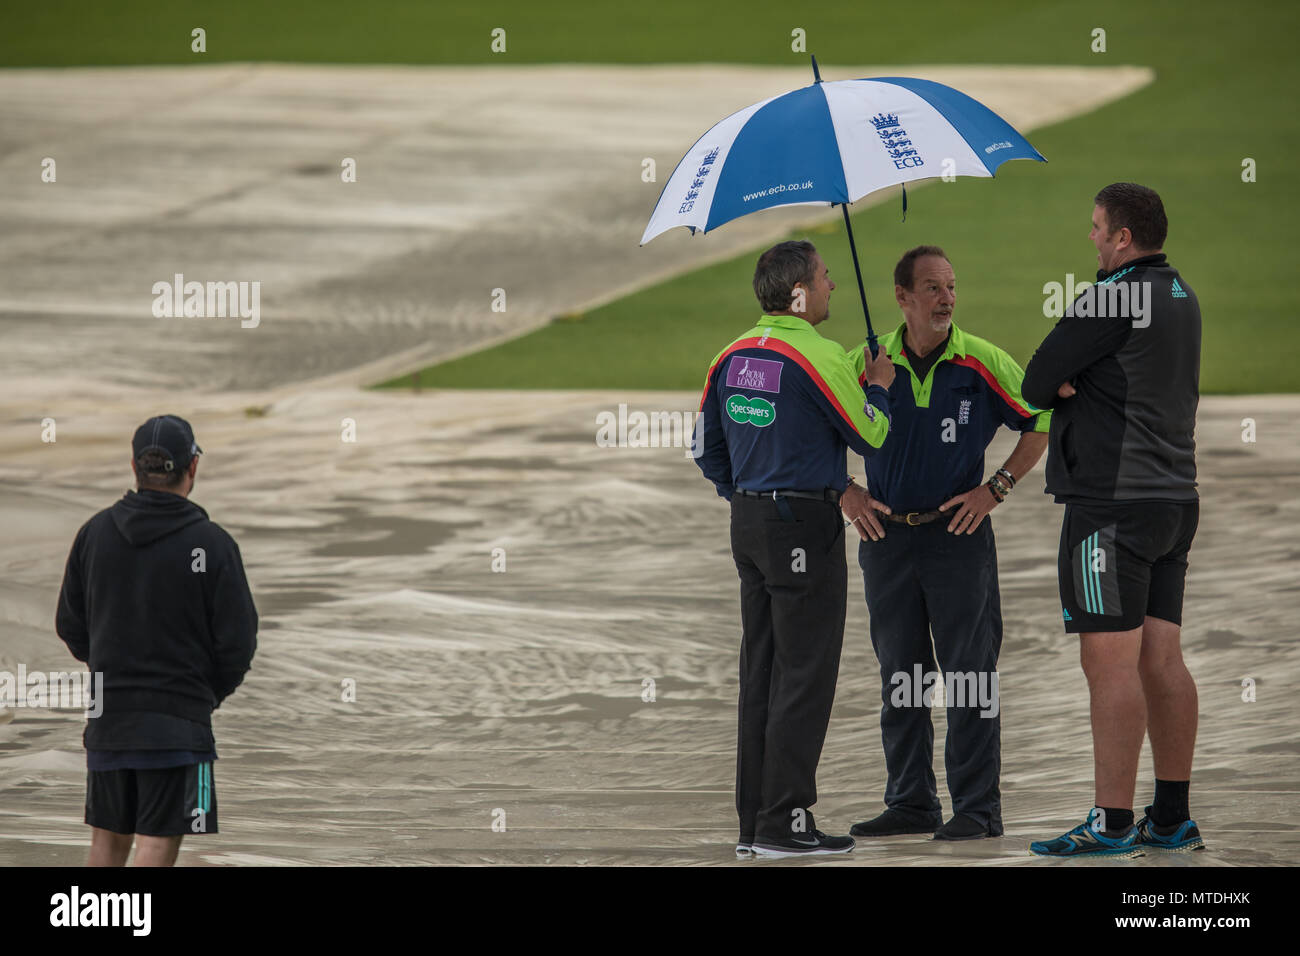 London,UK. 29 May, 2018. L-R: Umpires Richard Illingworth & Jeremy Lloyds discuss things with Surrey's Head Groundsman, Lee Fortis during a pitch inspection at the Oval. The match between Surrey and Sussex in the Royal London One-Day Cup was abandoned without a ball being bowled due to heavy rain in London. David Rowe/Alamy Live News Stock Photo